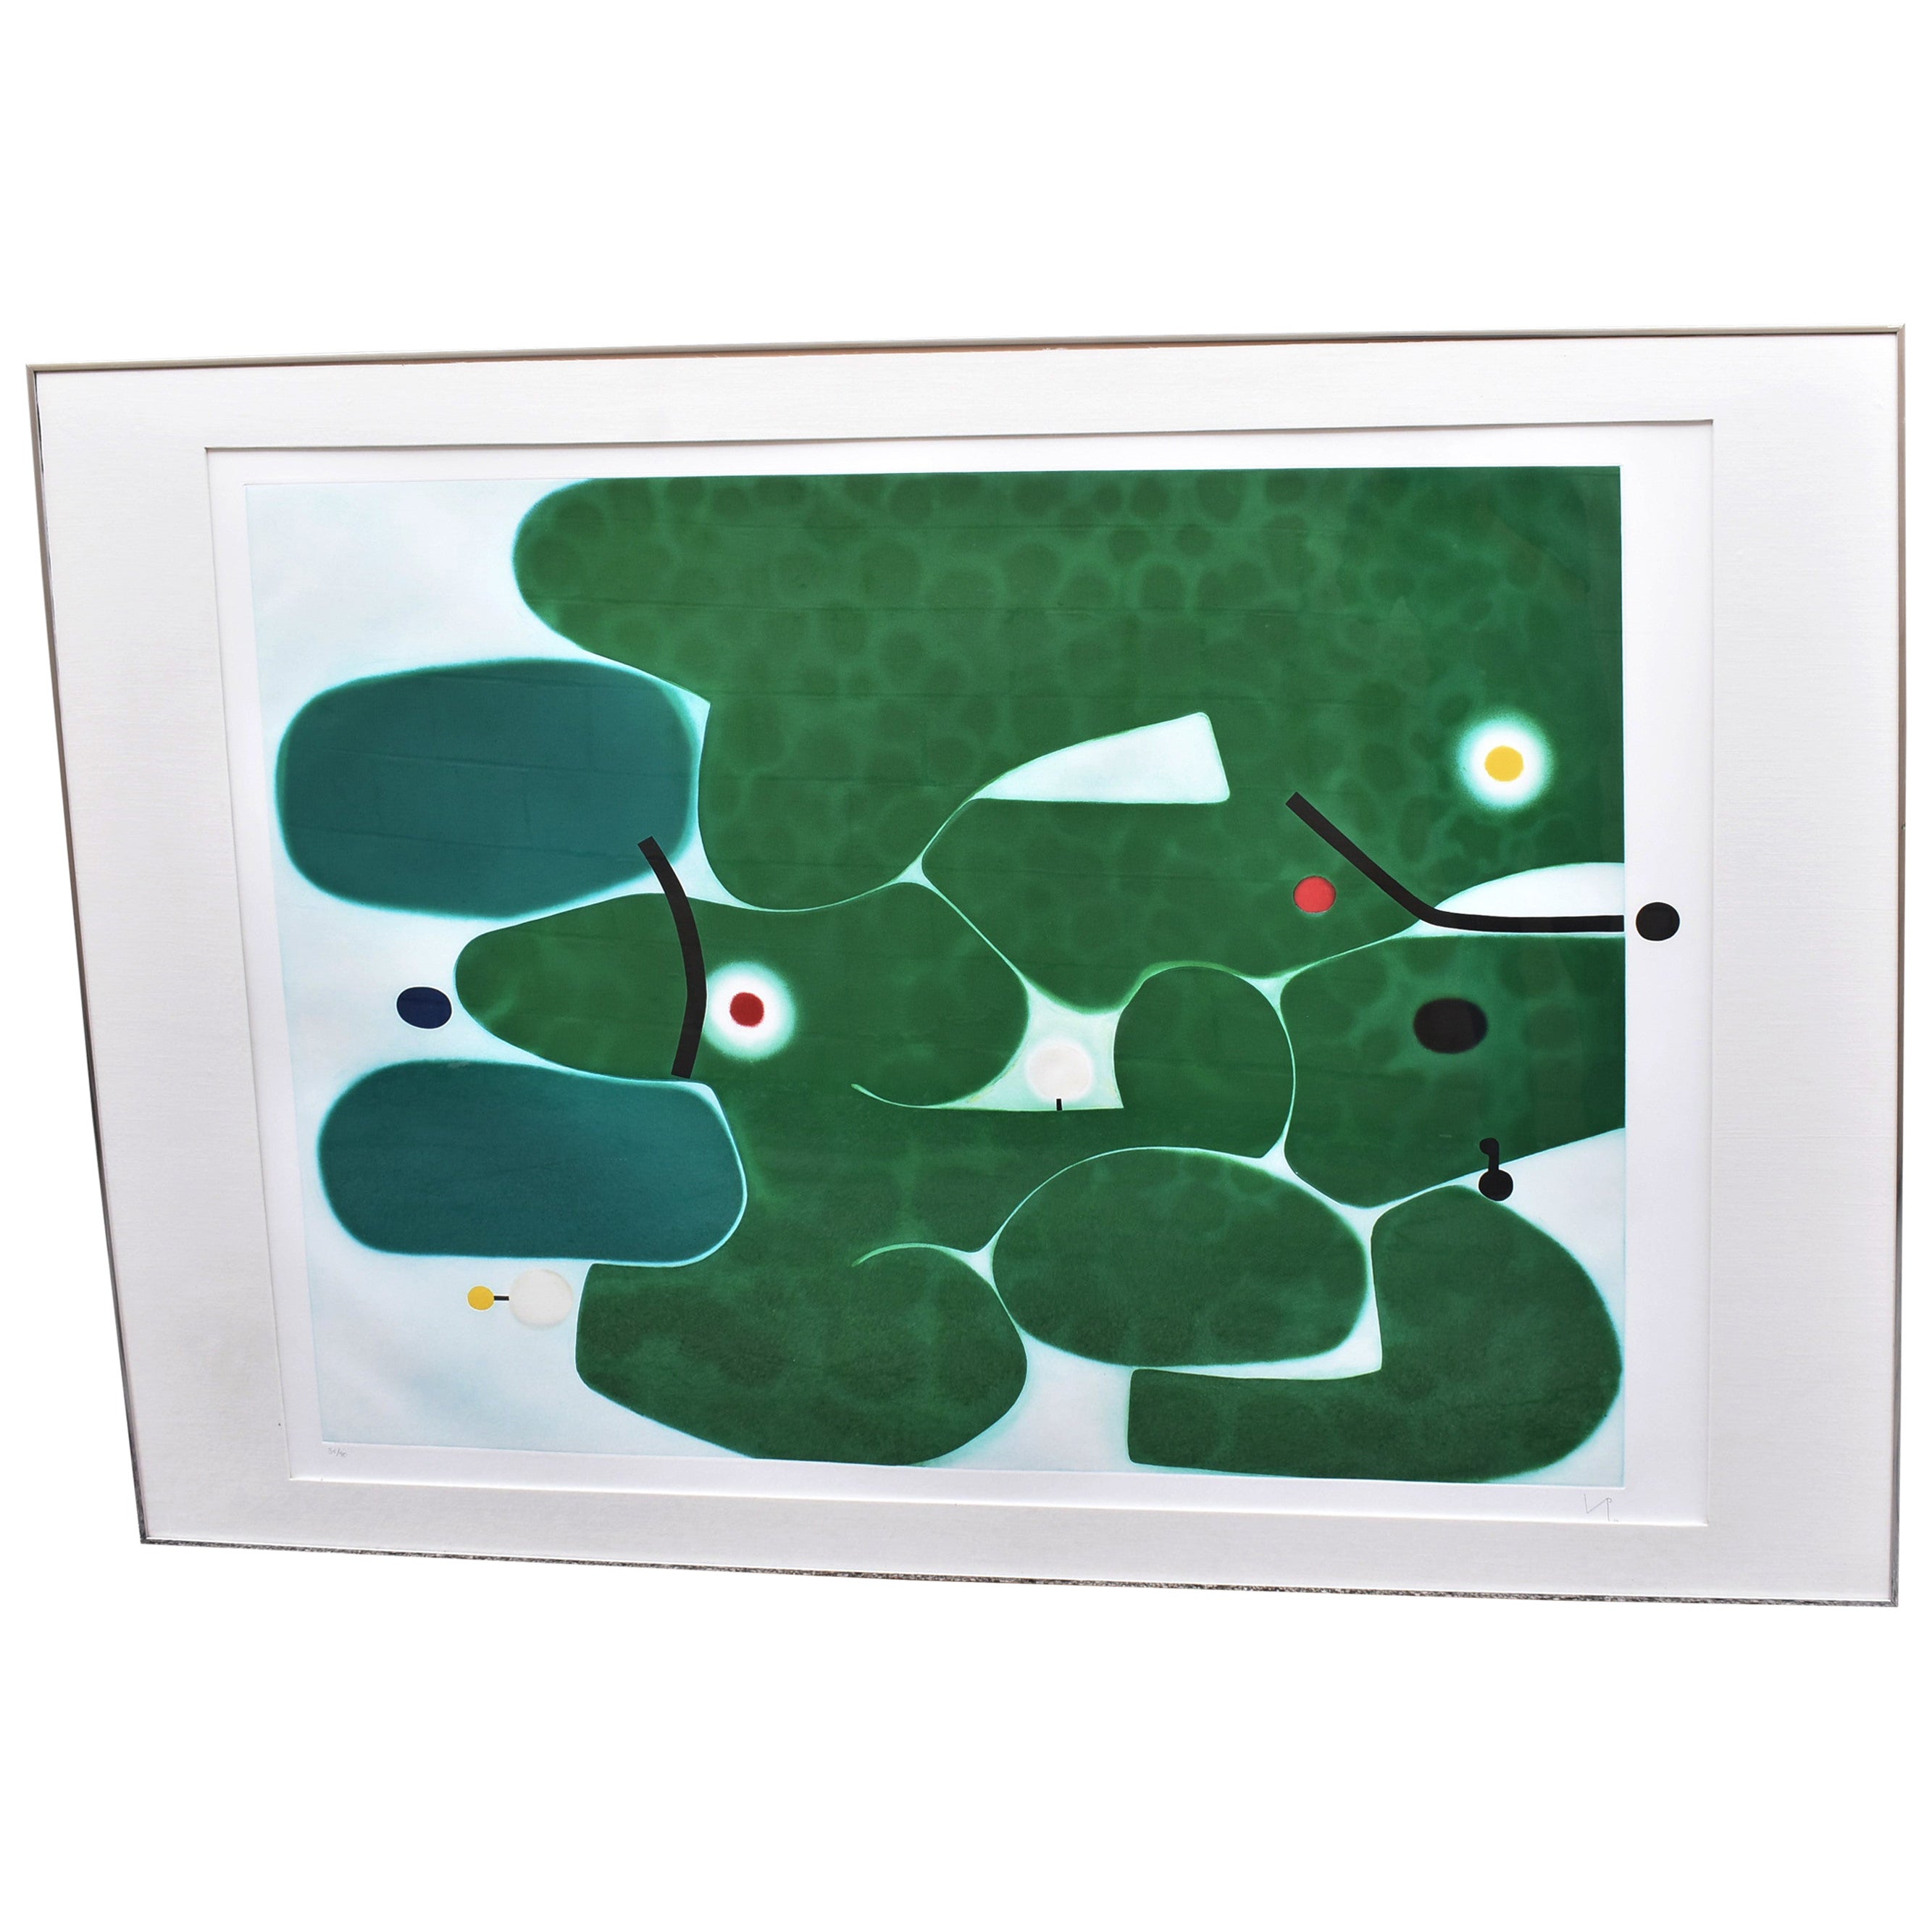 Victor Pasmore Lithograph Vigma Antoniniana 1980 Limited Edition 30/90 For Sale